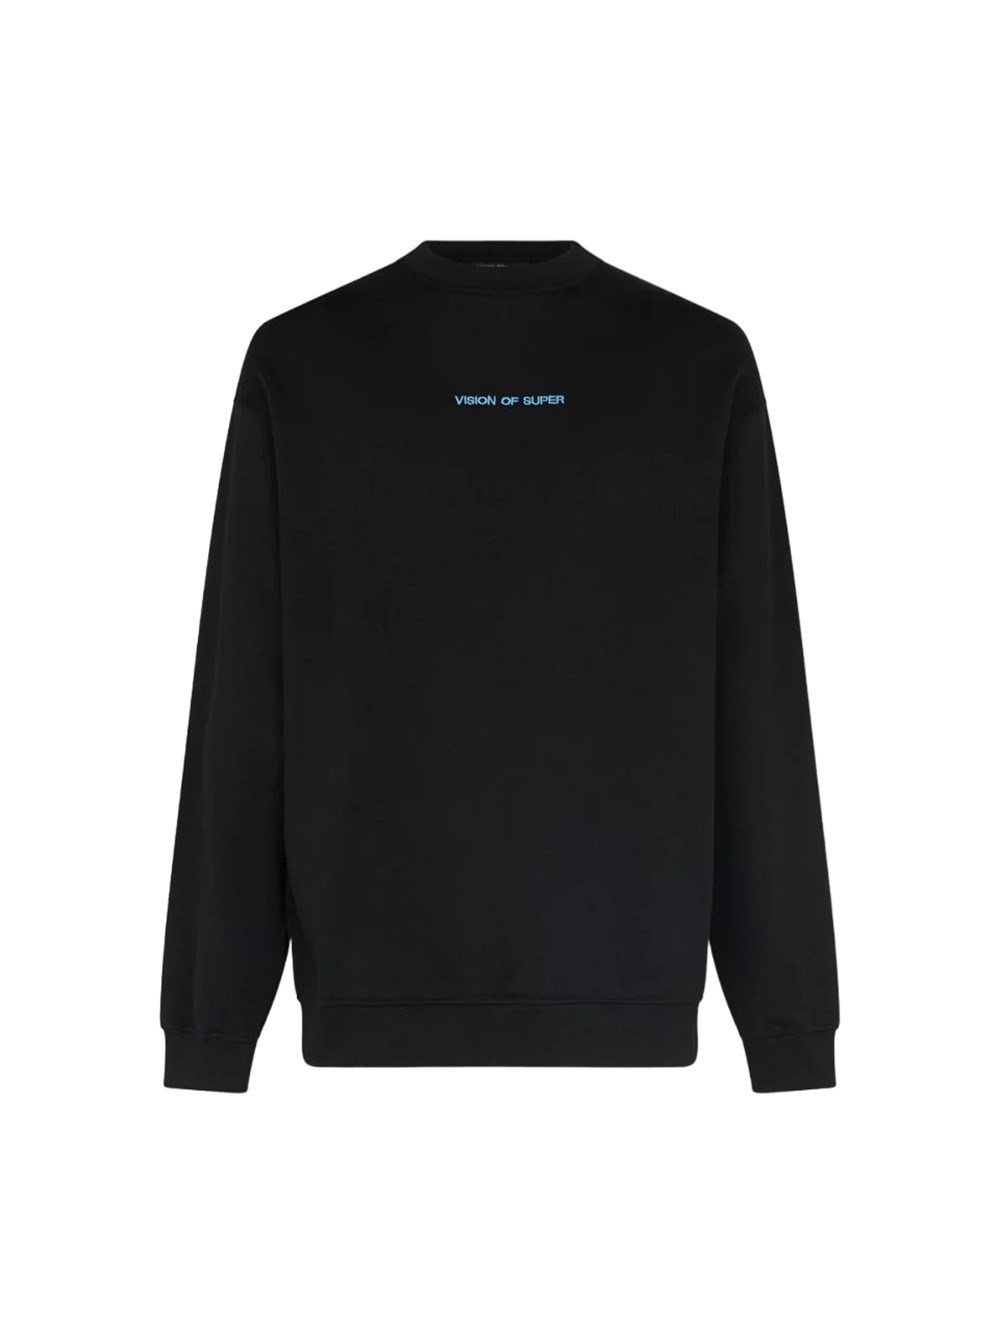 Vision Of Super Black Crewneck Sweatshirt With Silk-screen Printed Butterfly Graphics.